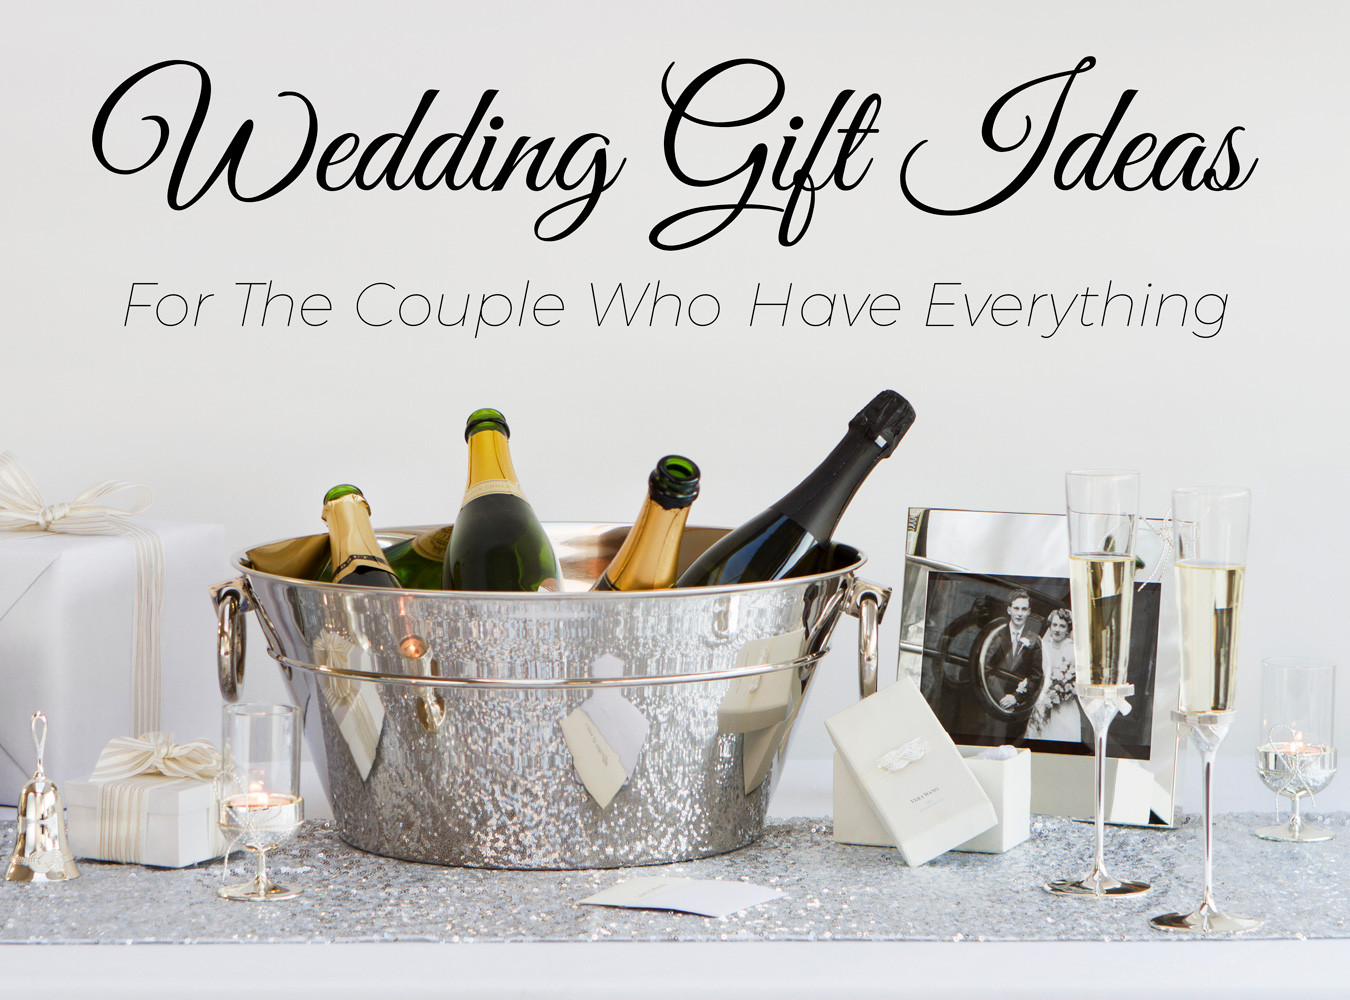 Gift Ideas For Young Married Couples
 5 Wedding Gift Ideas for the Couple Who Have Everything